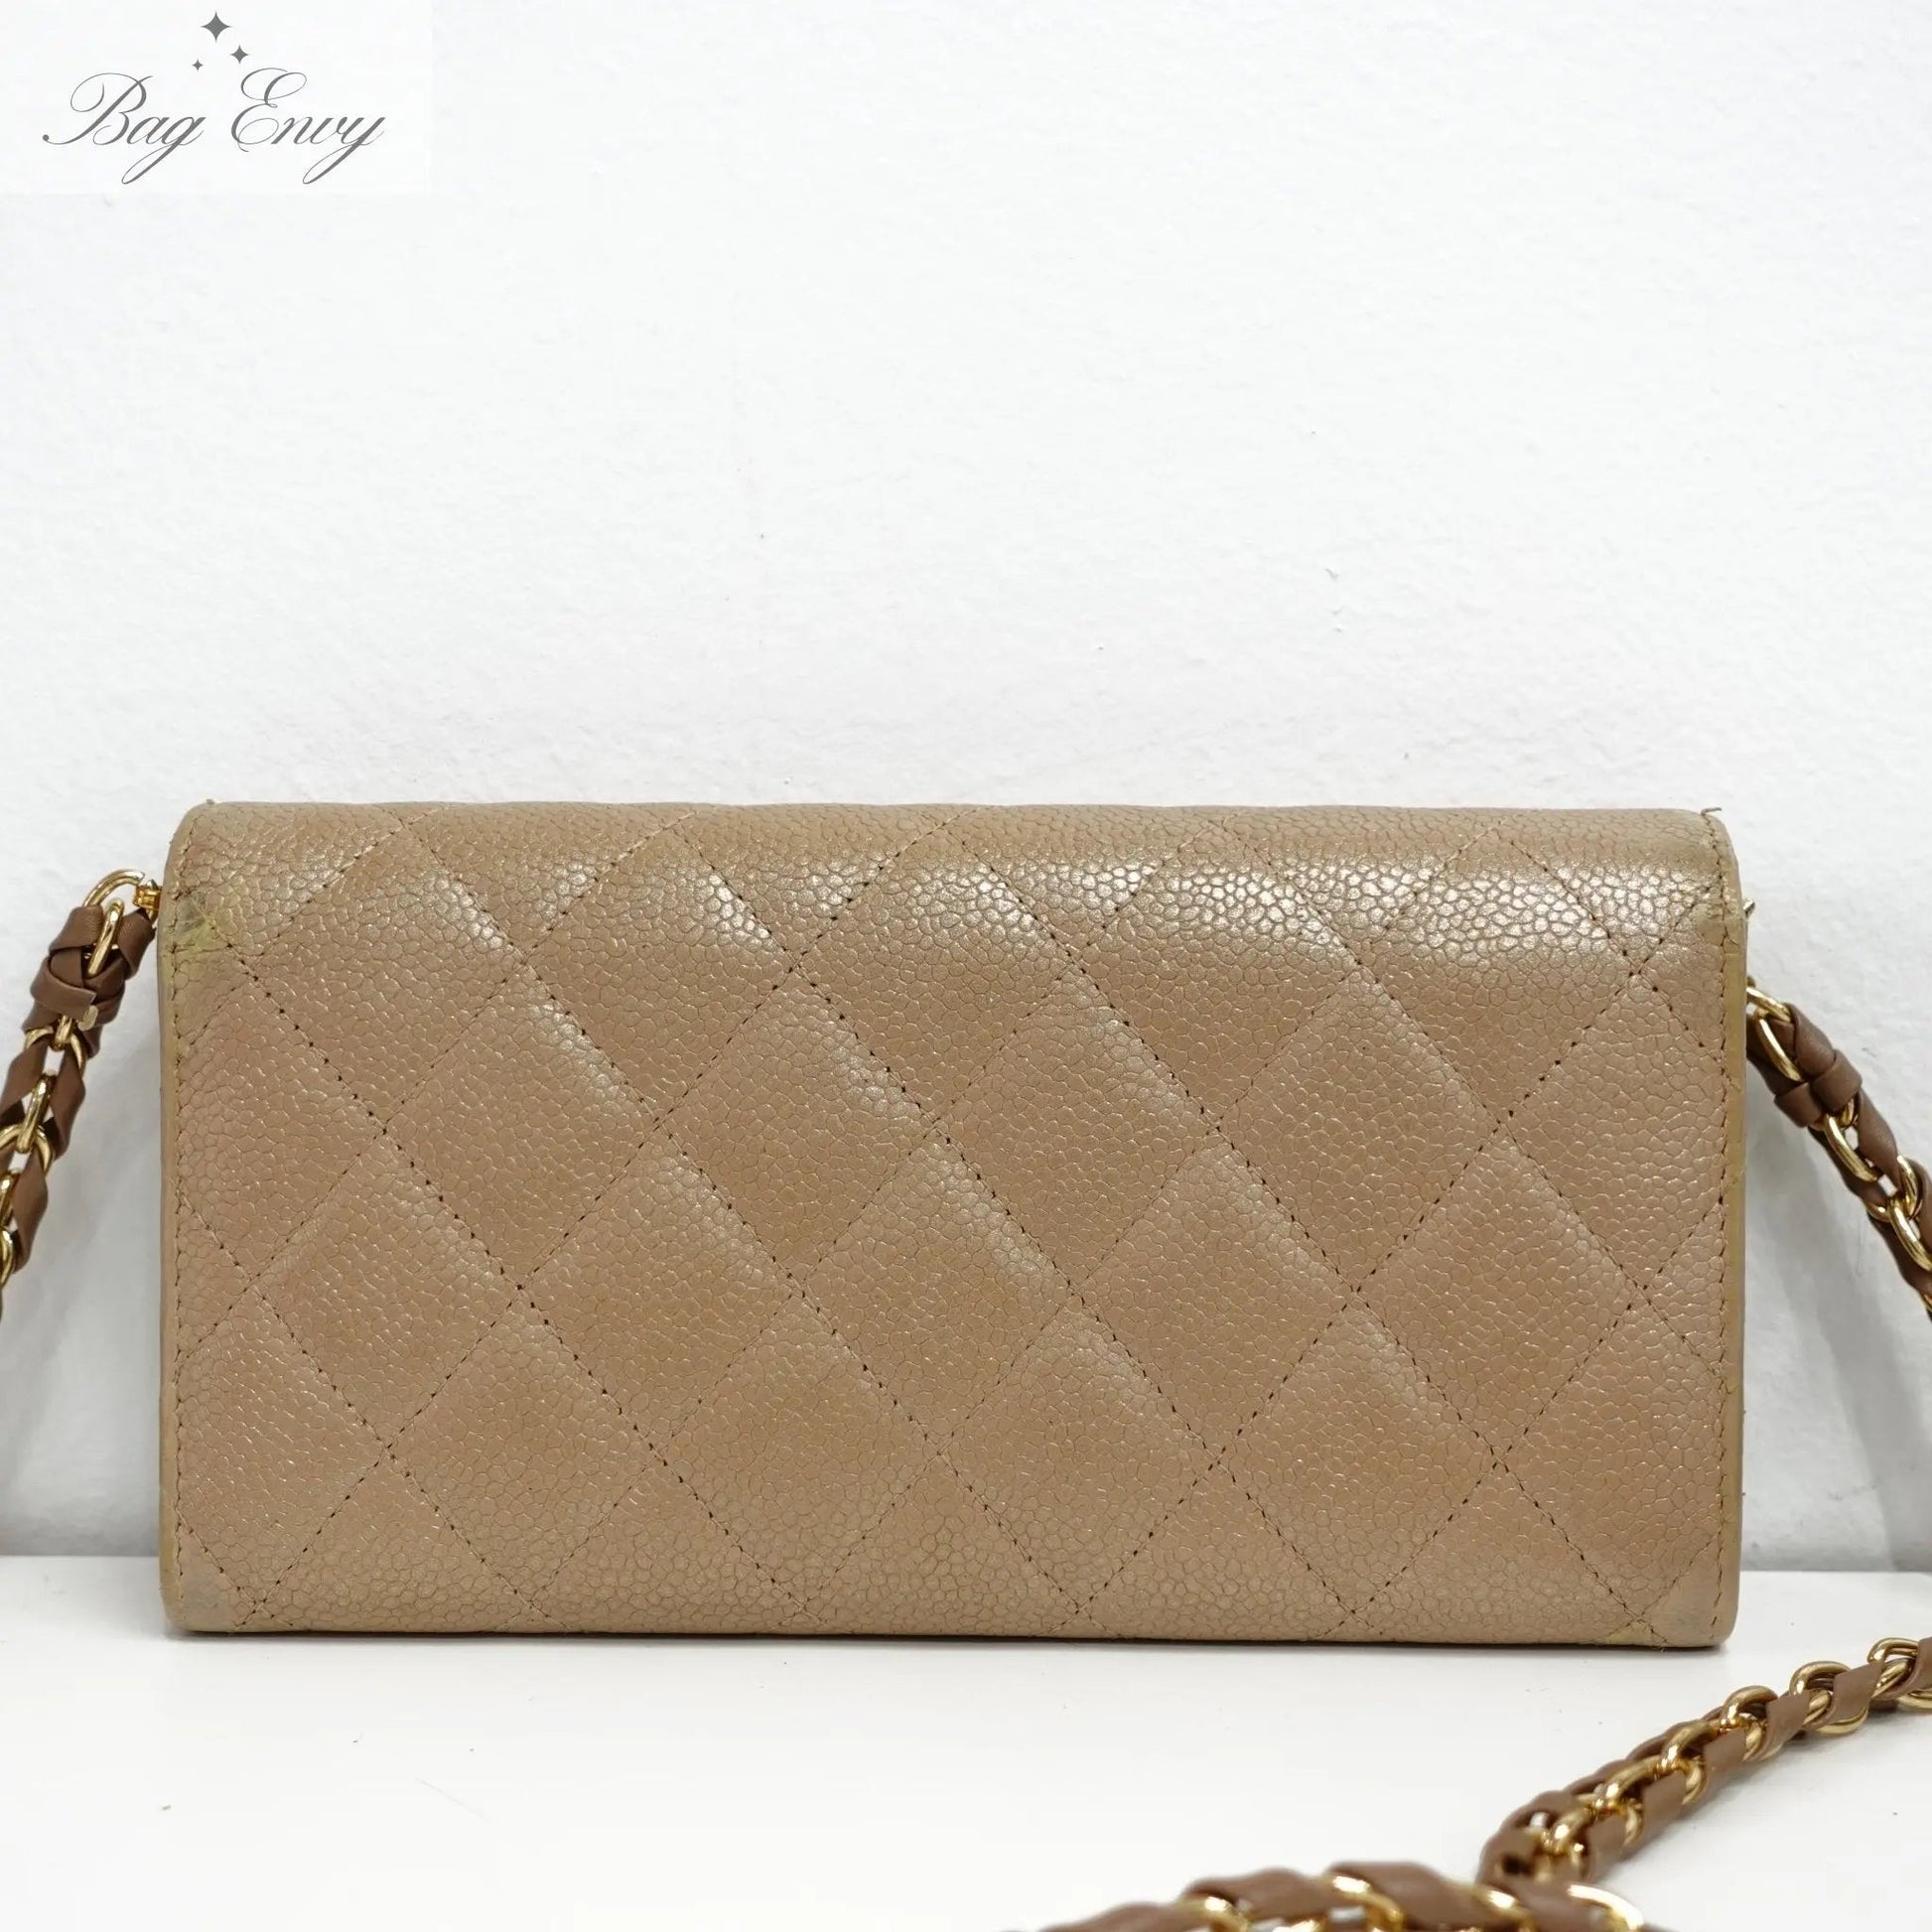 CHANEL Caviar Long Flap Wallet with Unbranded Chain - Bag Envy